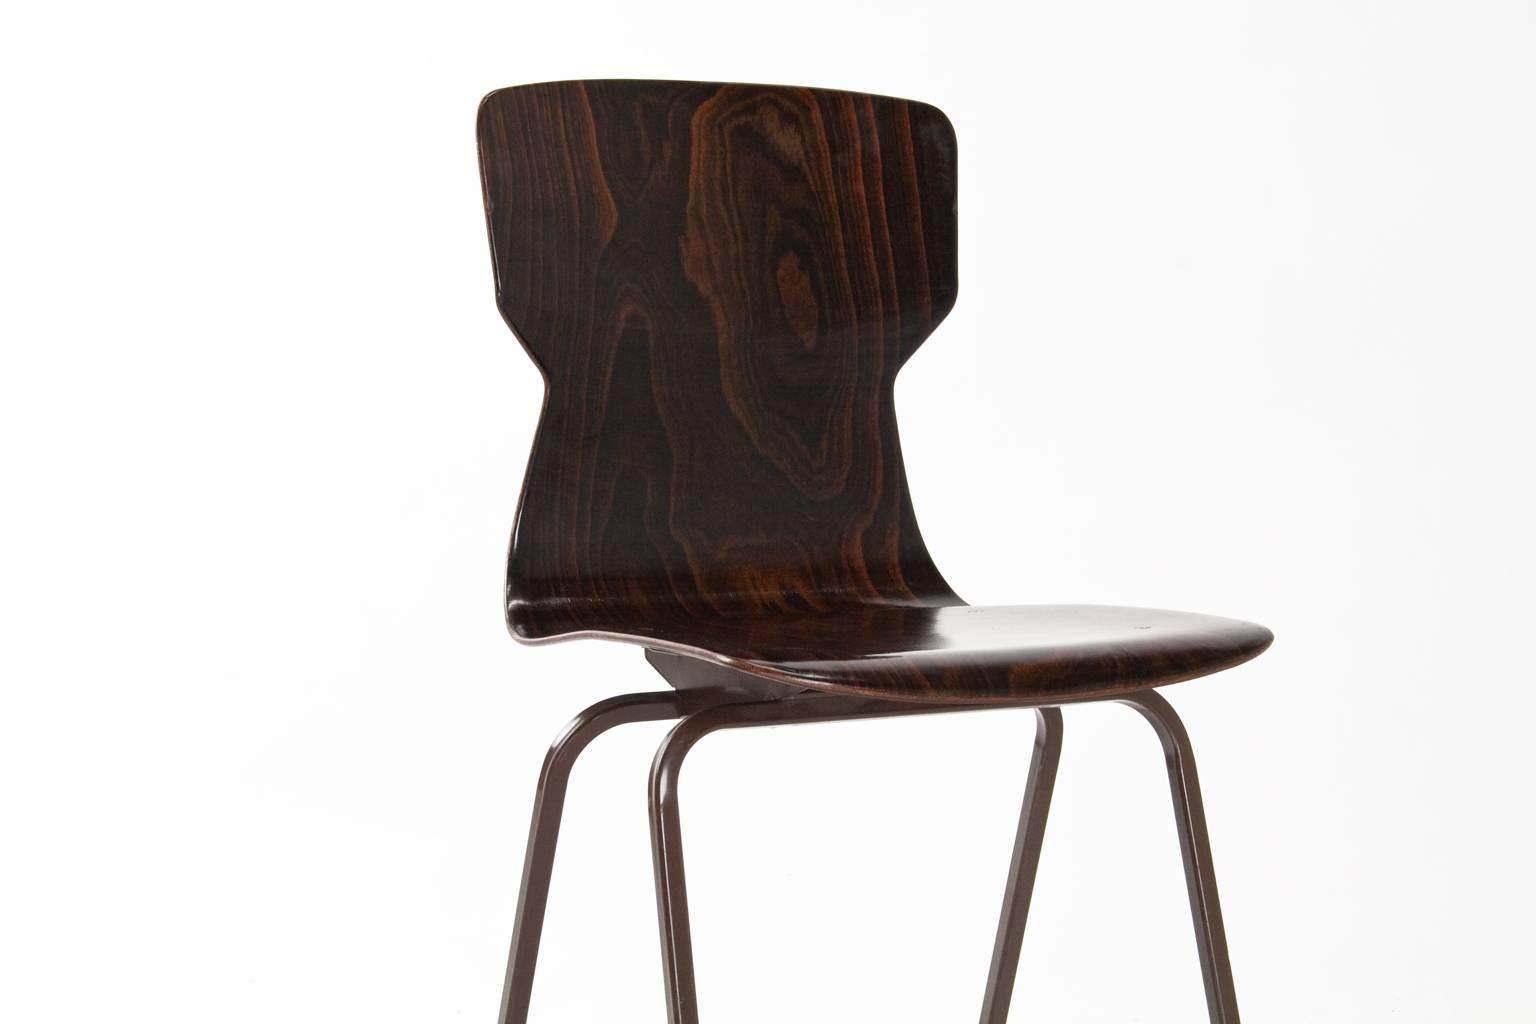 Molded Stock of 1970s Industrial School Chairs by Eromes Wijchen 'NL'